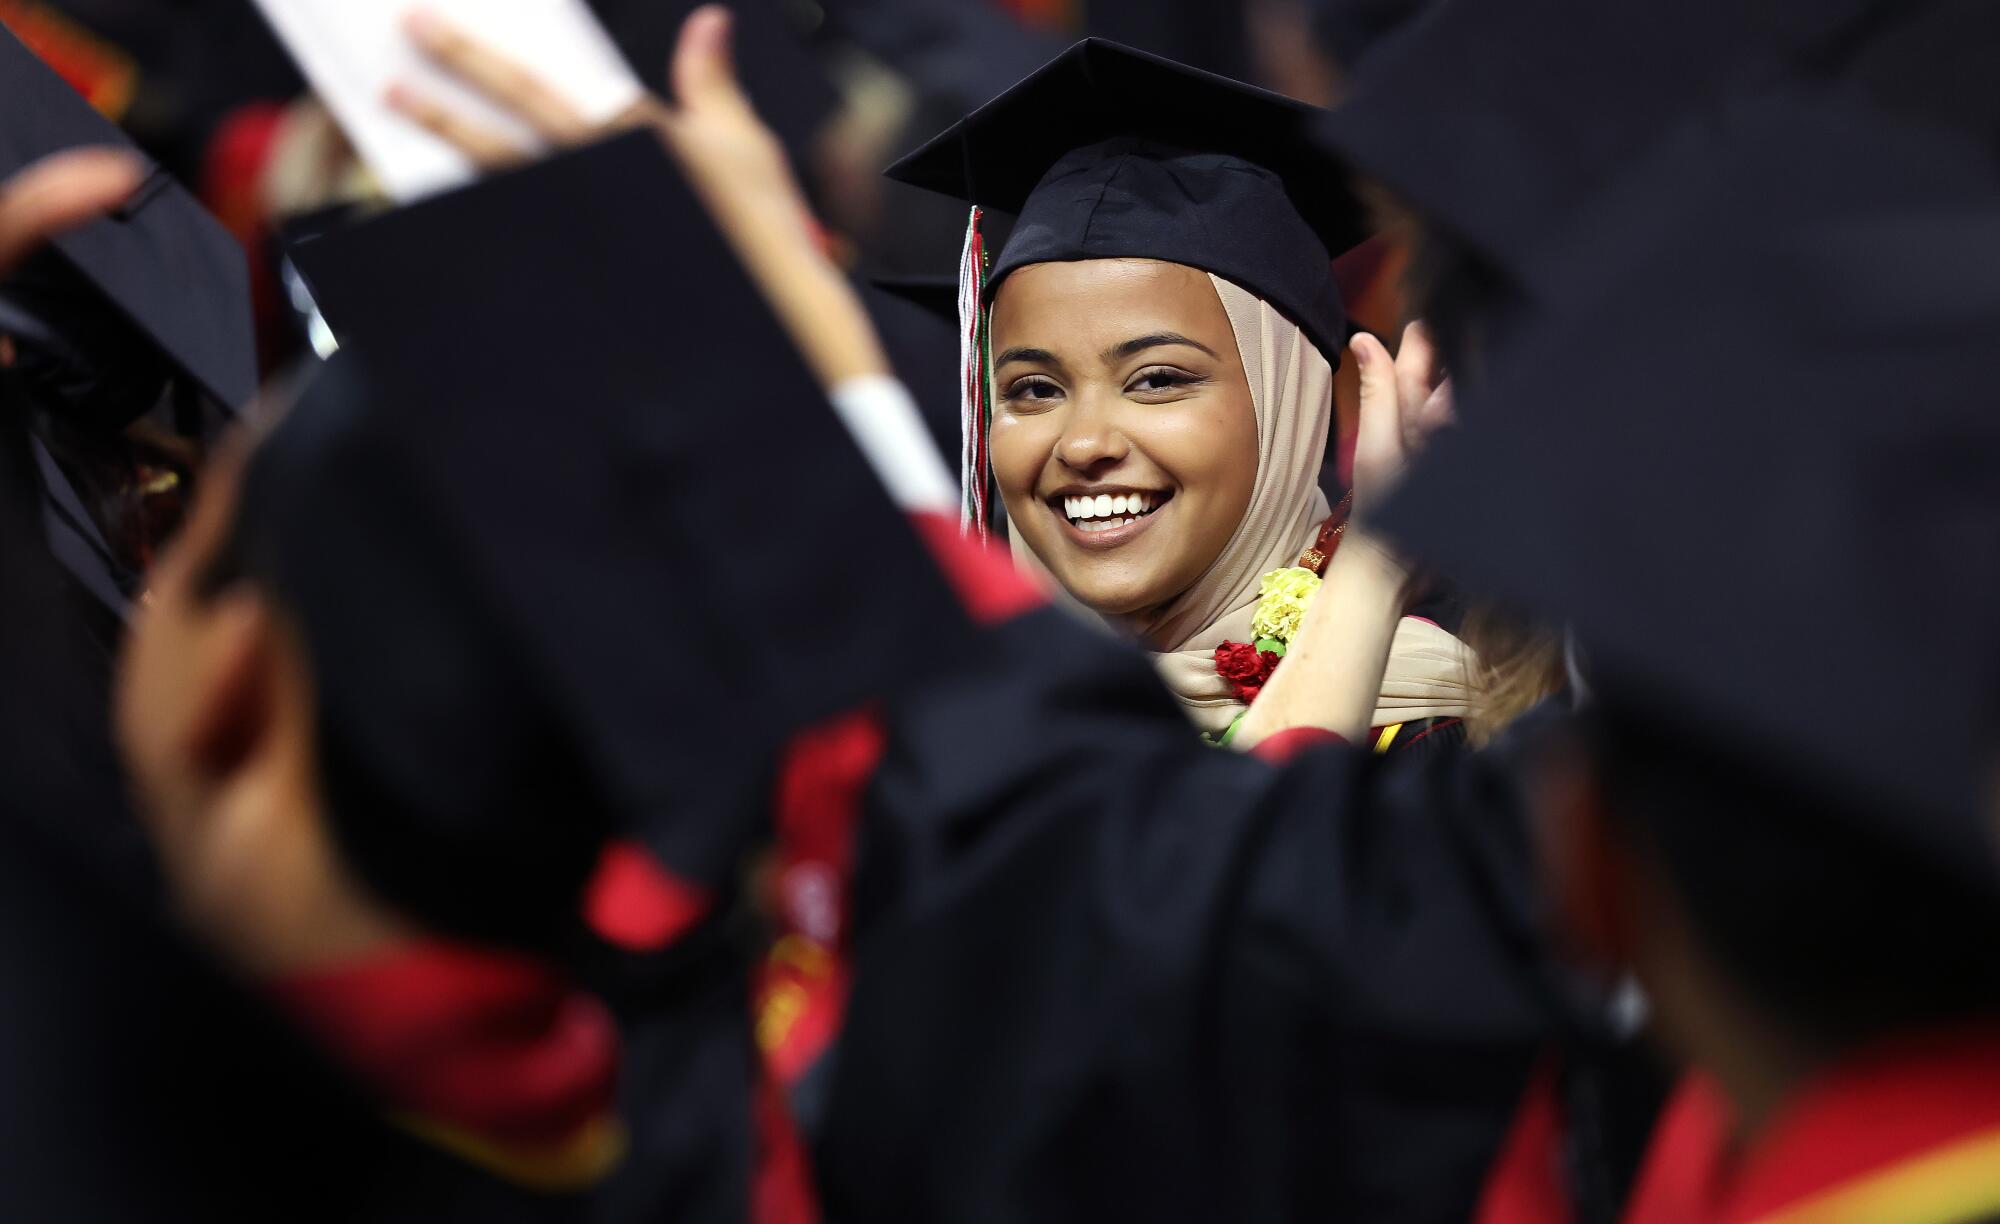 USC valedictorian Asna Tabassum is framed by other students in soft focus